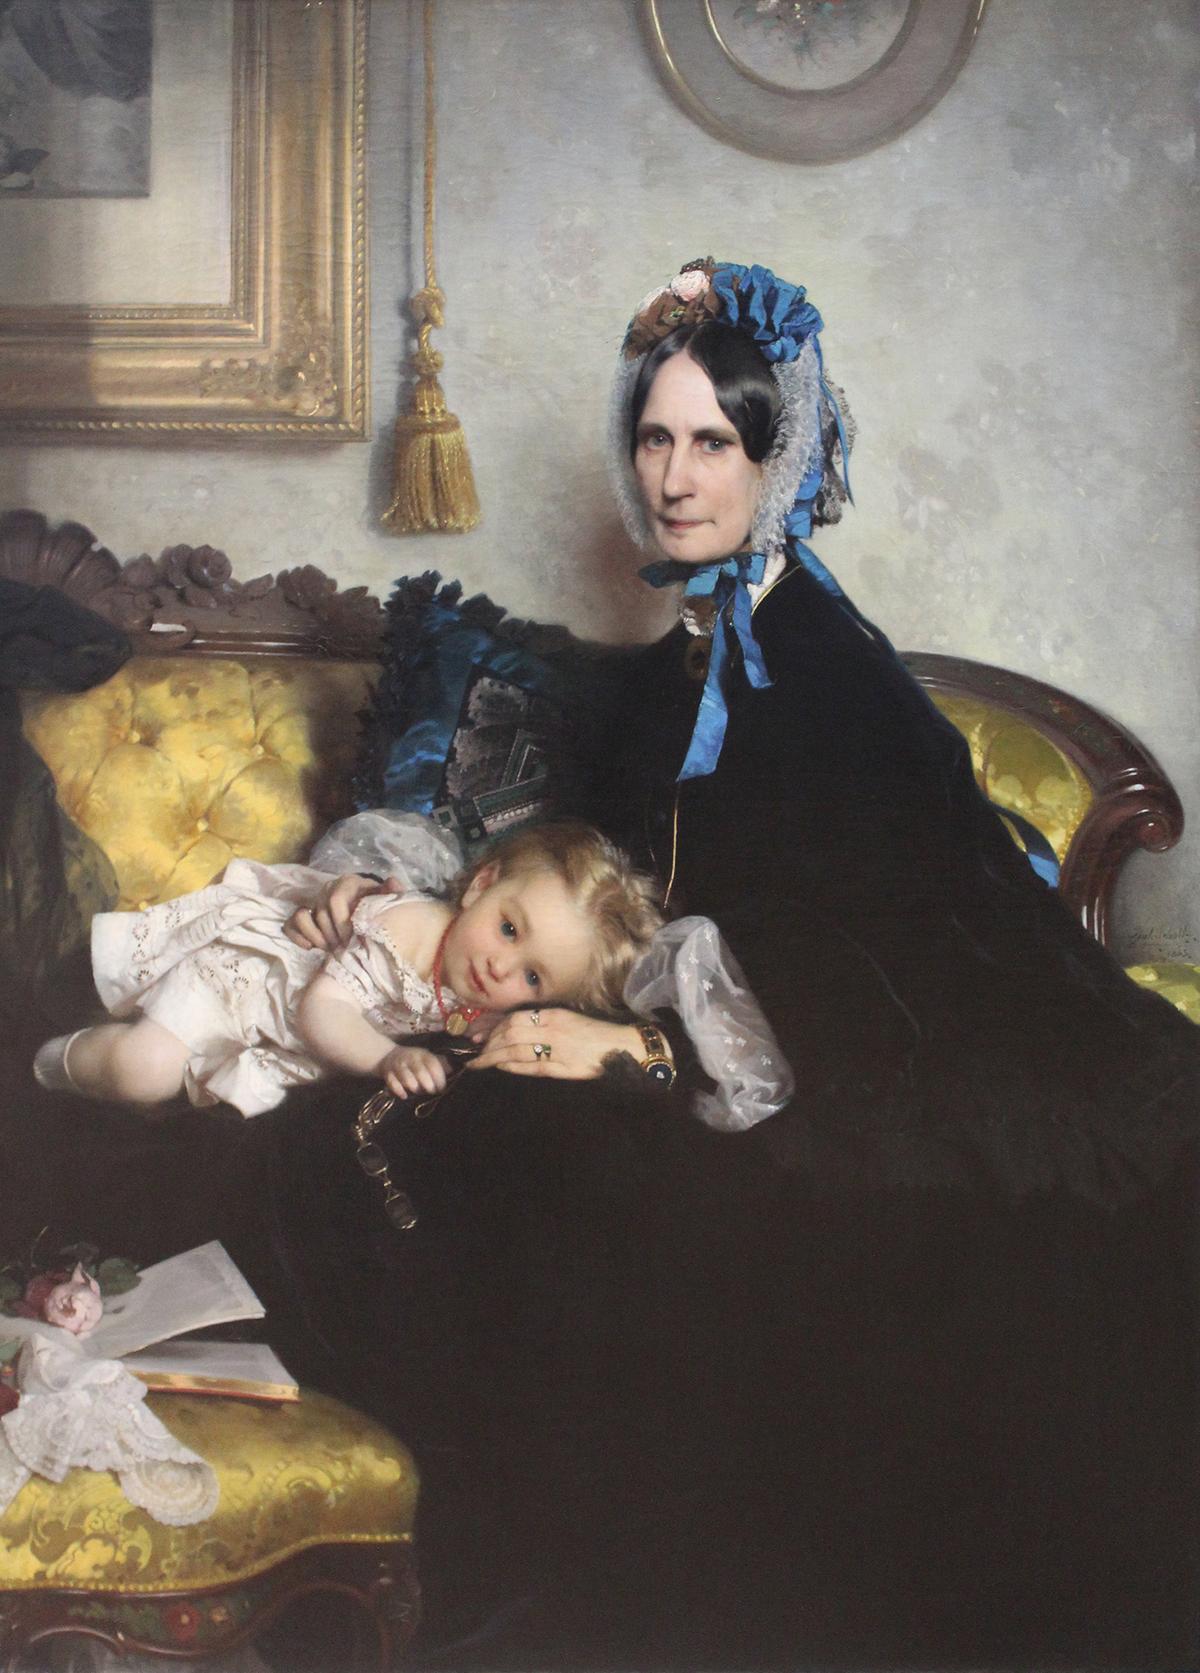 "Grandmother and Granddaughter," 1863, by Julius Scholtz. Oil on canvas. (Public Domain)